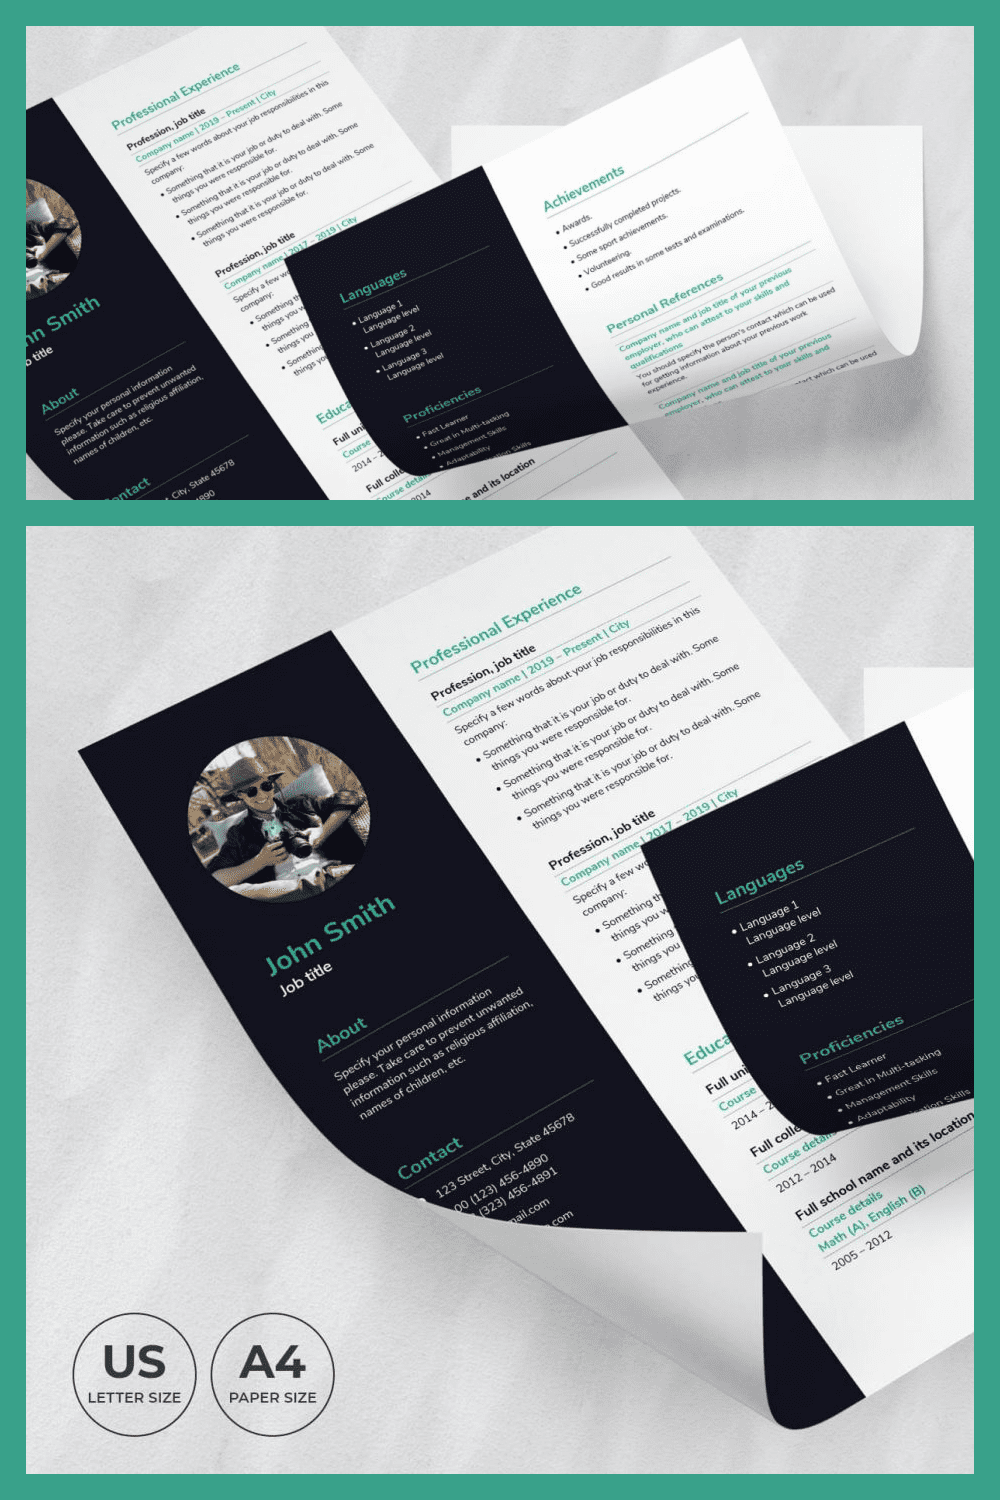 Brochure with a black and green design.